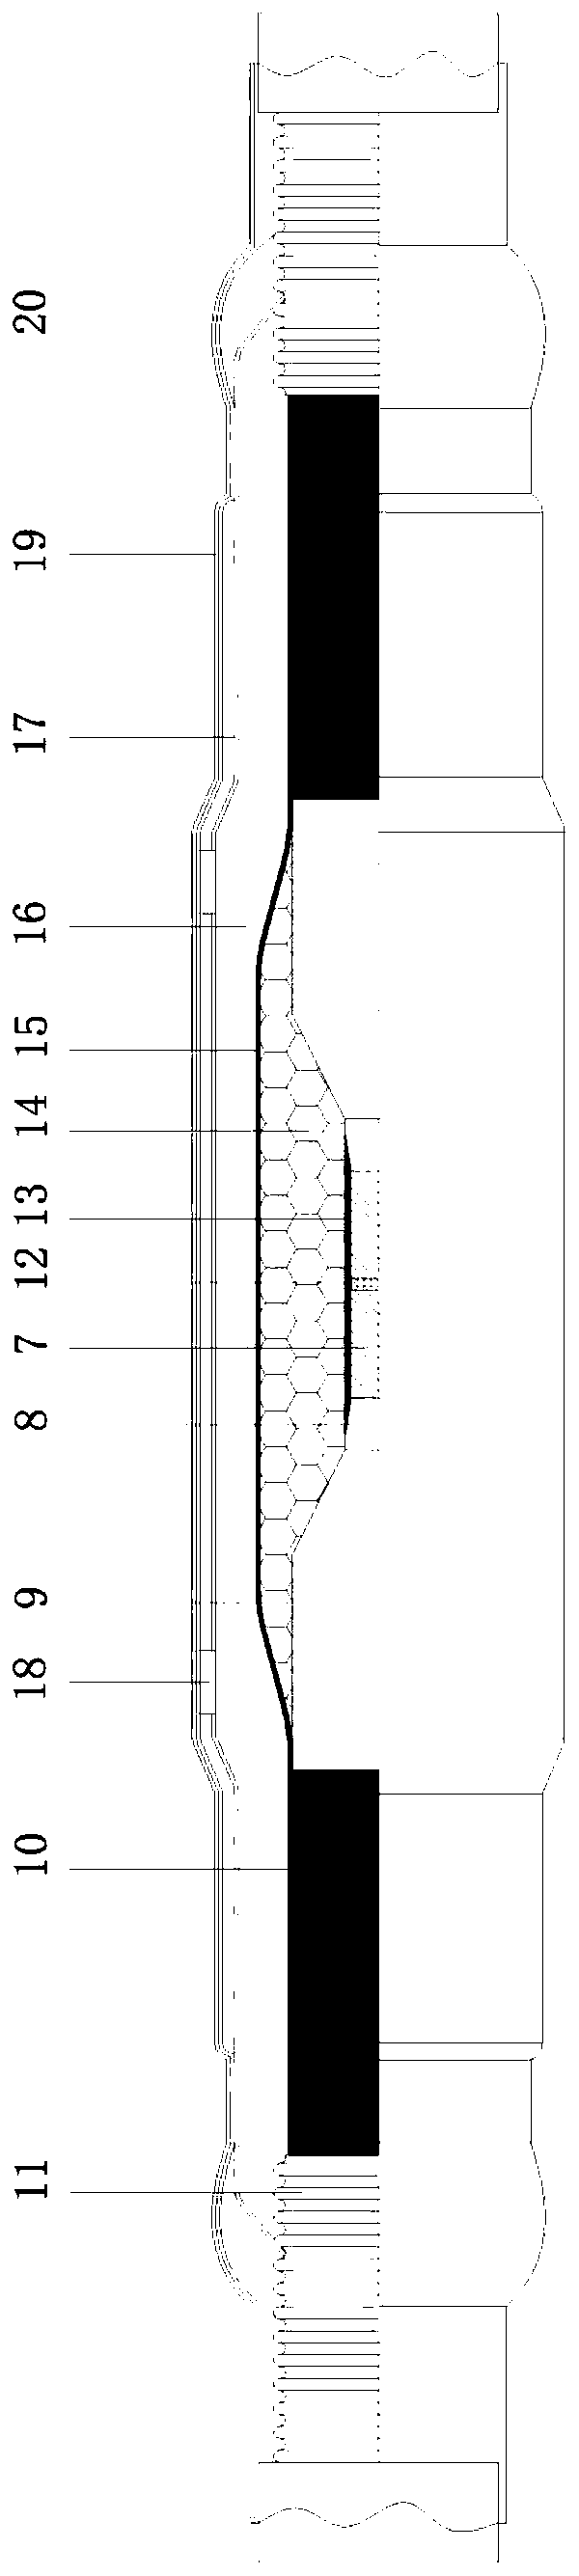 Crosslinked polyethylene power cable intermediate connector and manufacturing method thereof